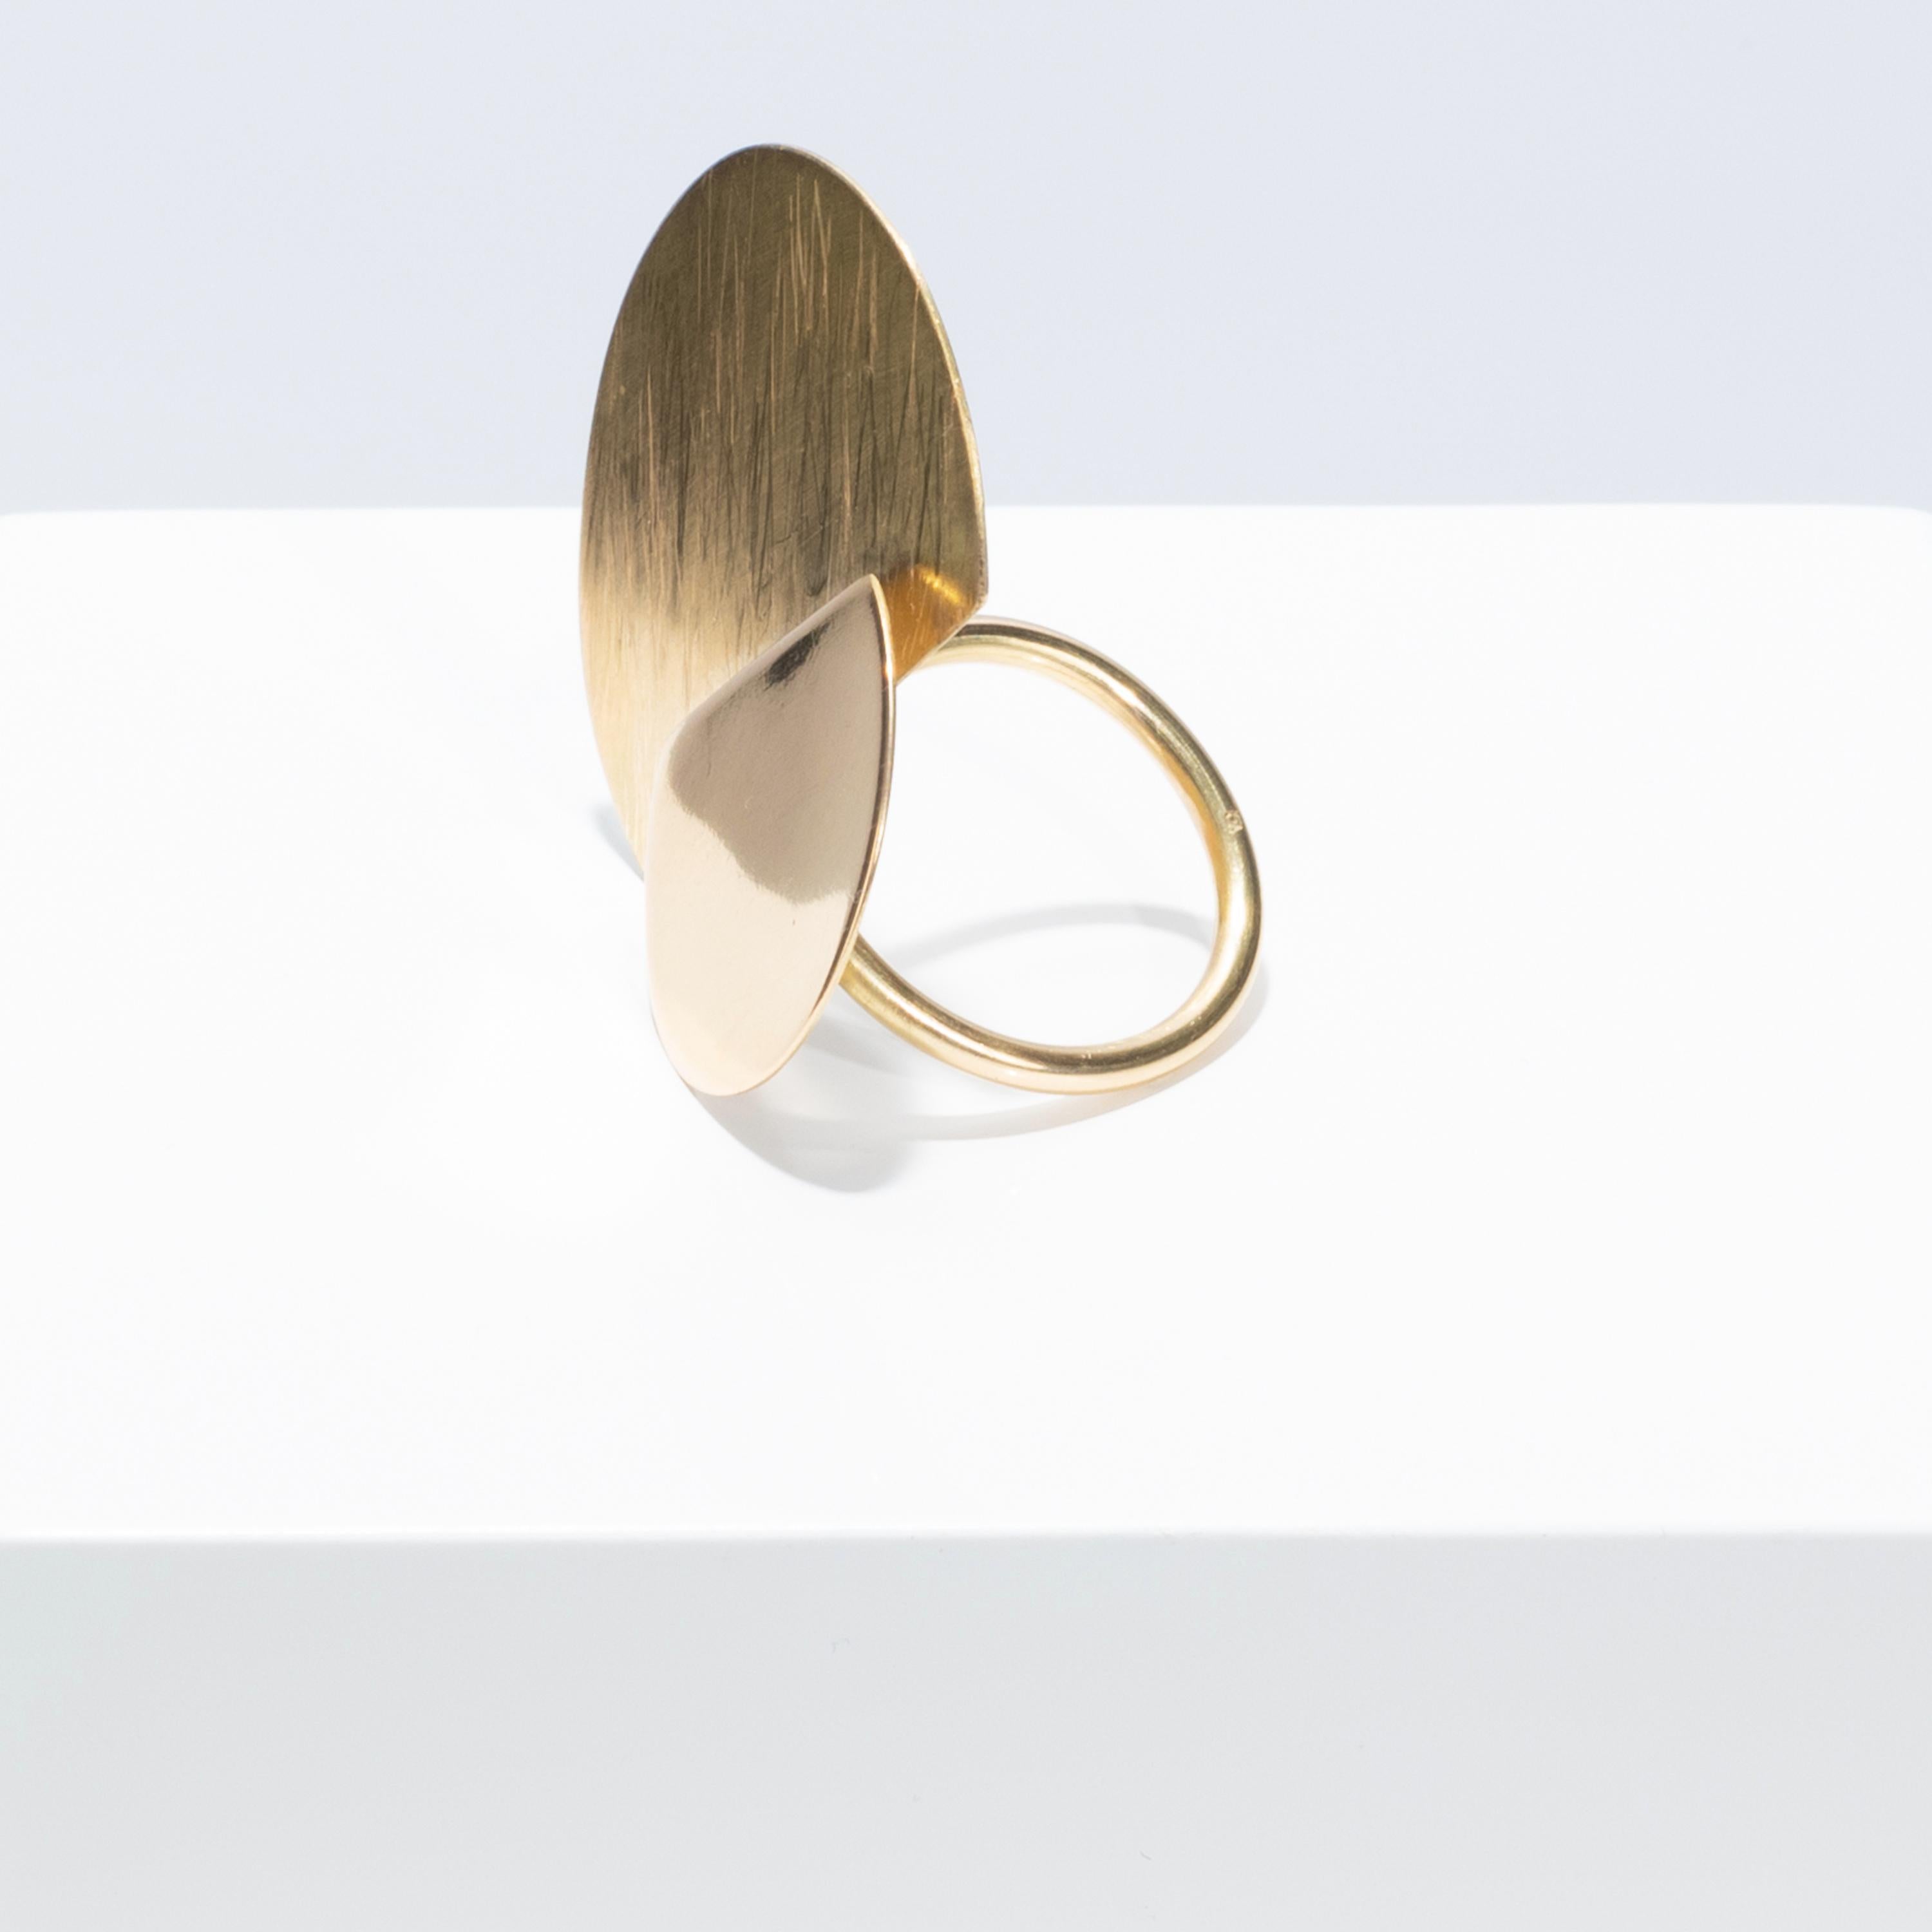 Catherine Le Gal’s One-of-a-kind Artisan 18 Karat Yellow Gold Half Moon Ring In New Condition For Sale In London, GB